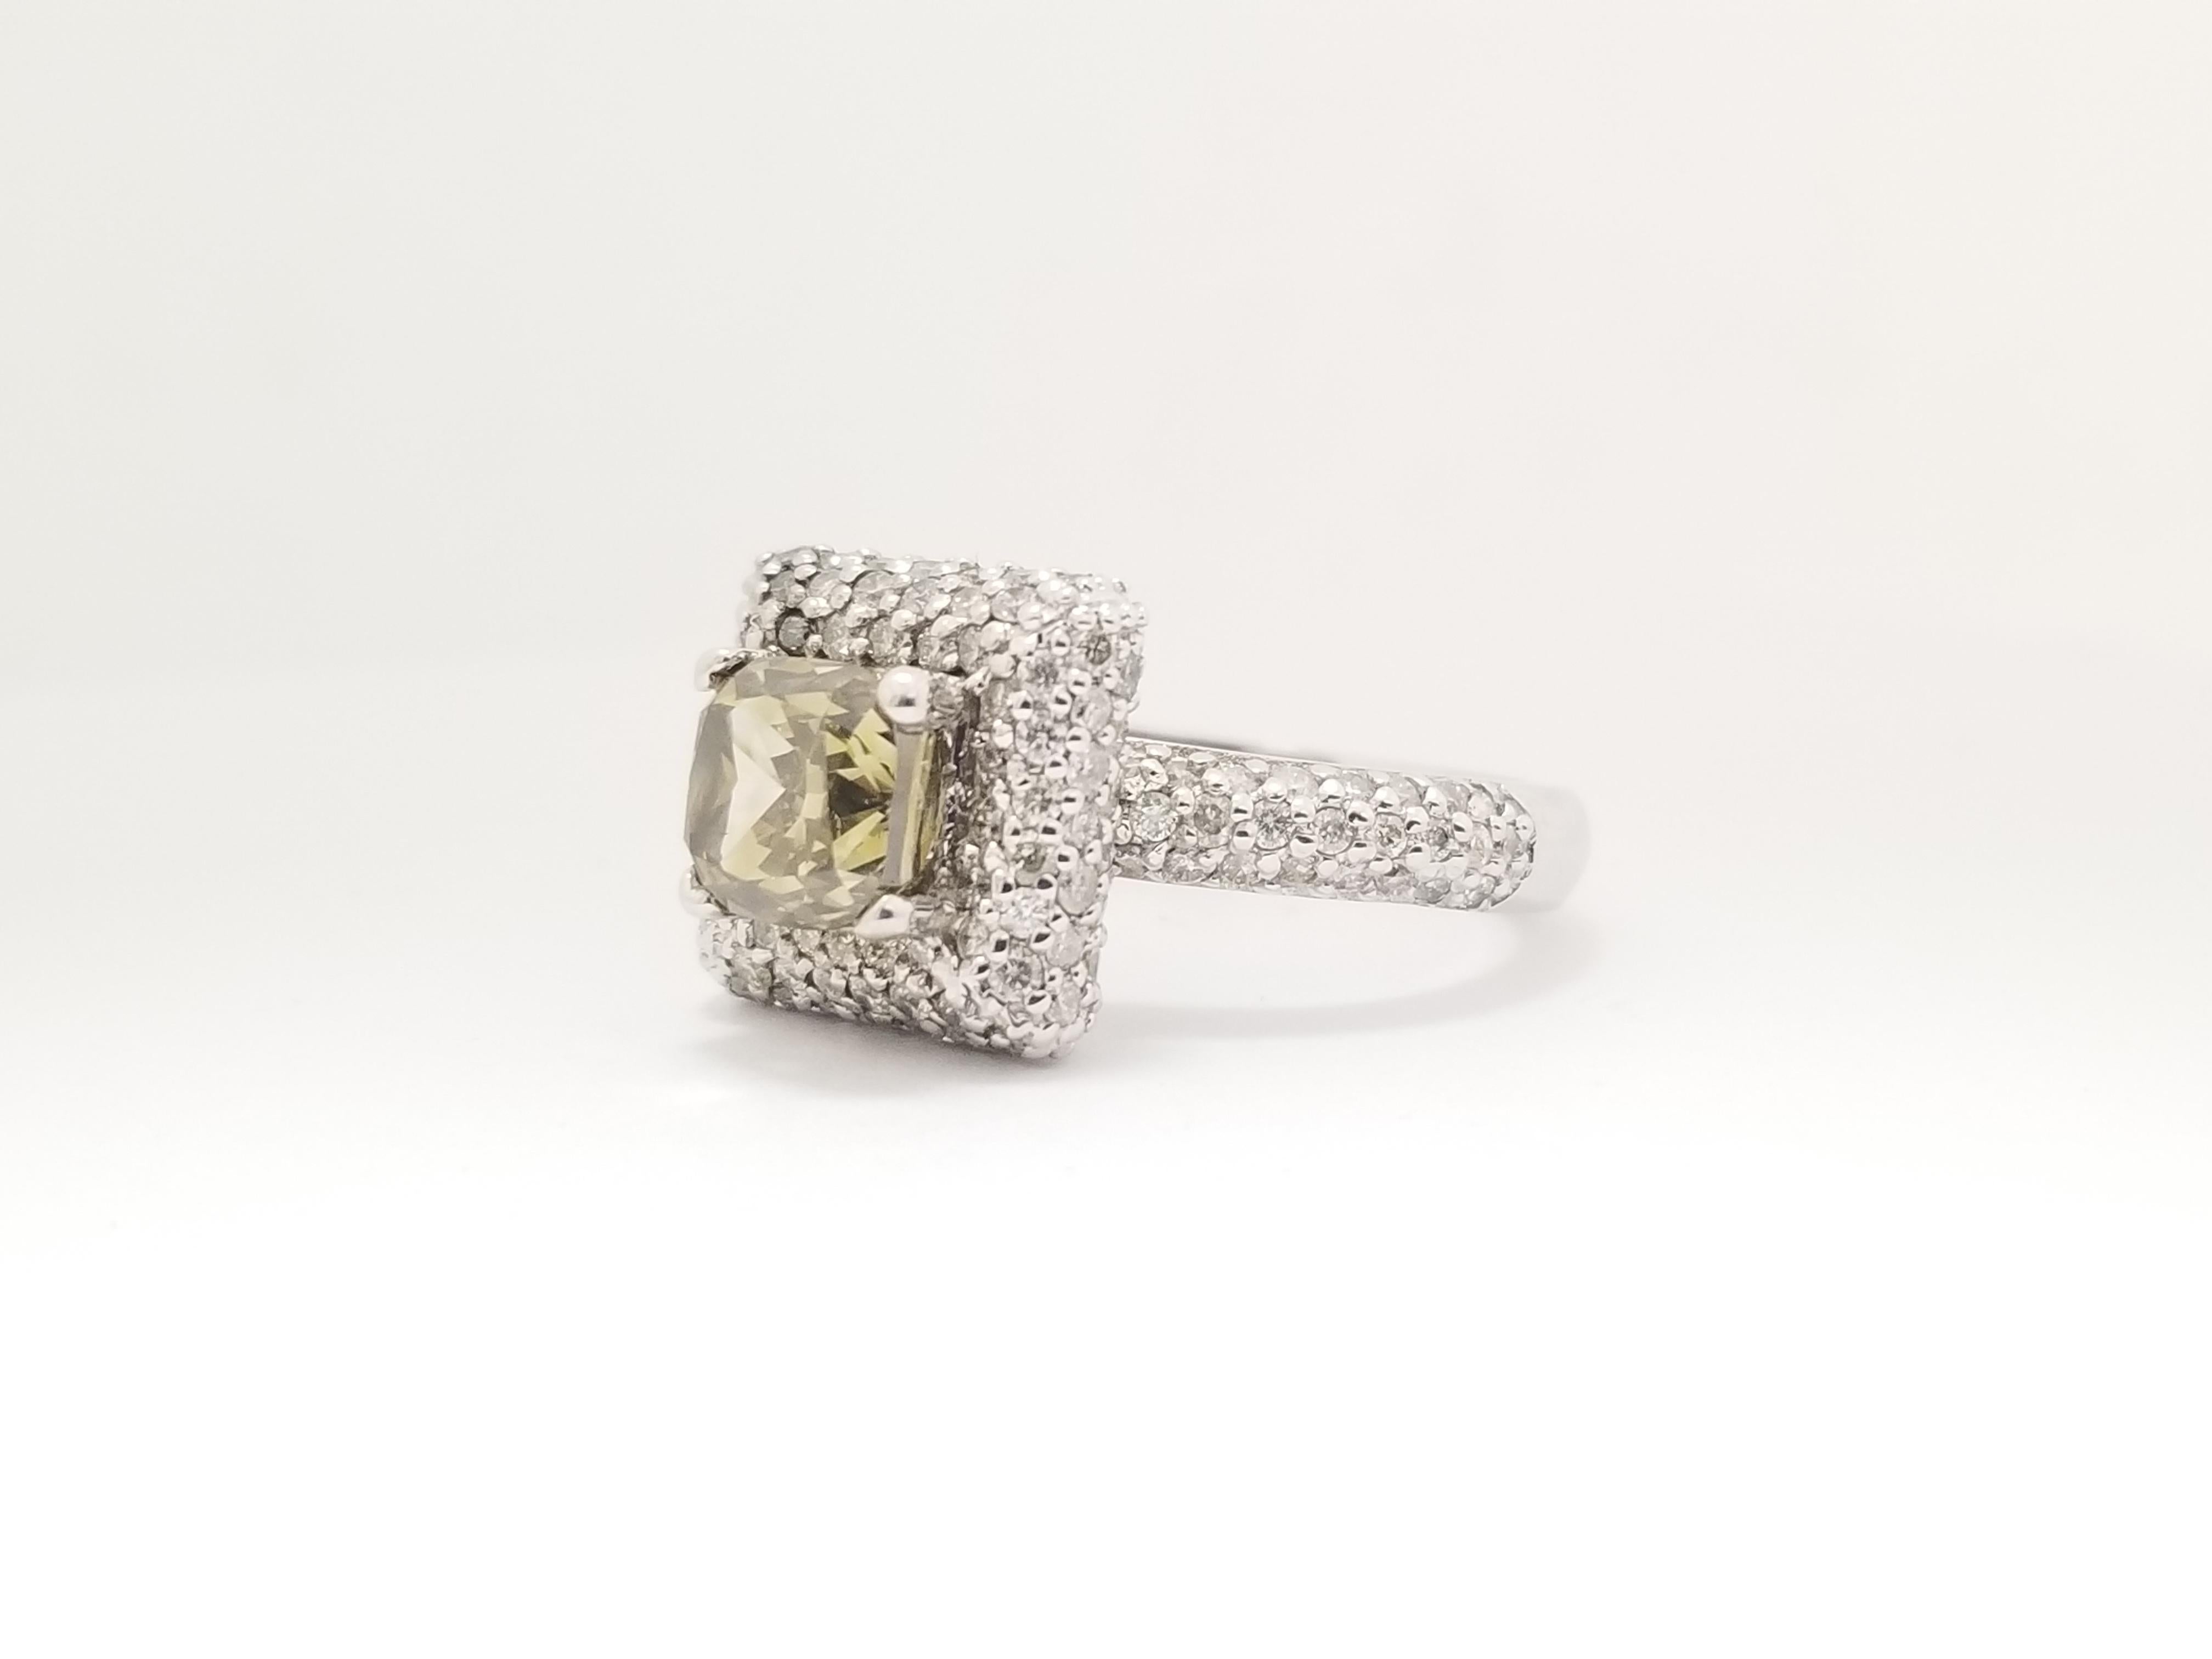 GIA natural cushion cut diamond weighs 2.37 Carats. 4 prong center set surrounded by 1.50 cttw paved round white diamonds 14K white gold setting. 
Color: Natural Fancy Dark Brown-Greenish Yellow
Ring size 7 can be resize.